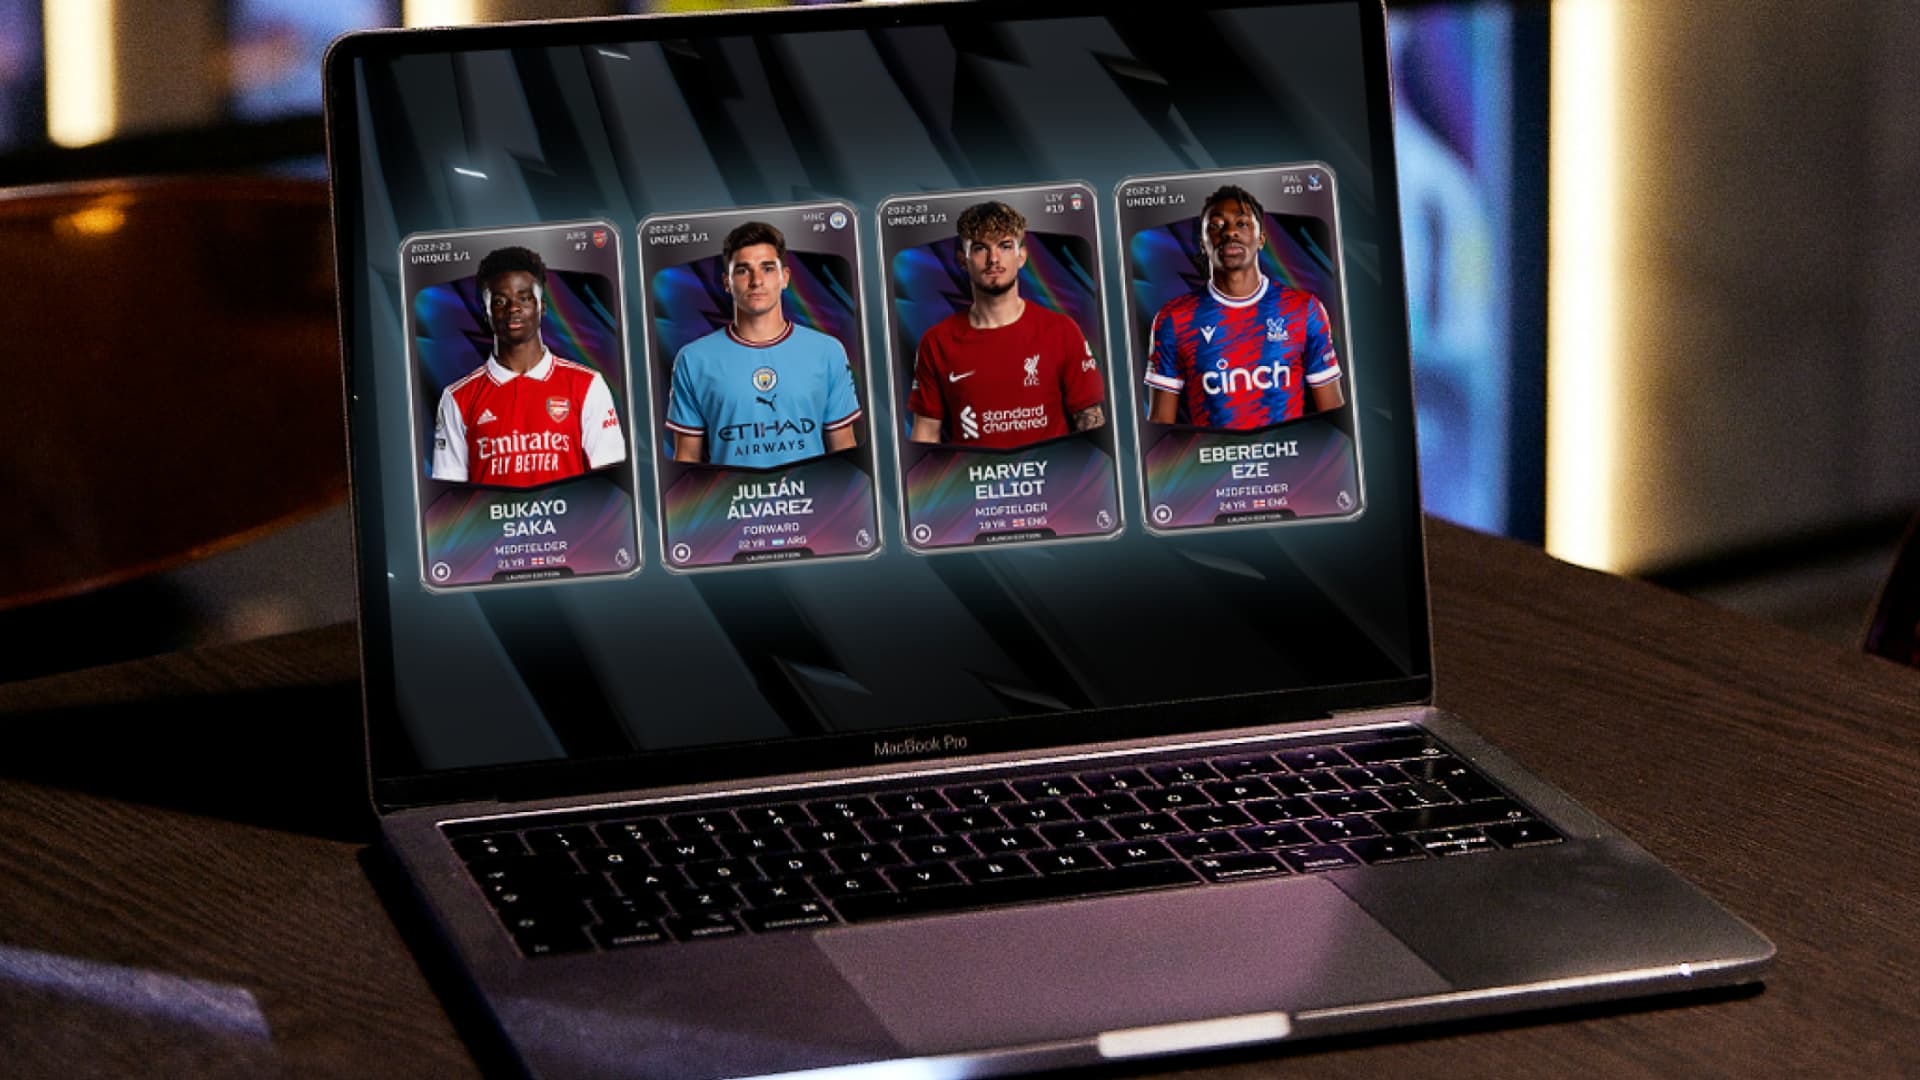 Premier League signs deal with NFT-based fantasy soccer game despite crypto downturn